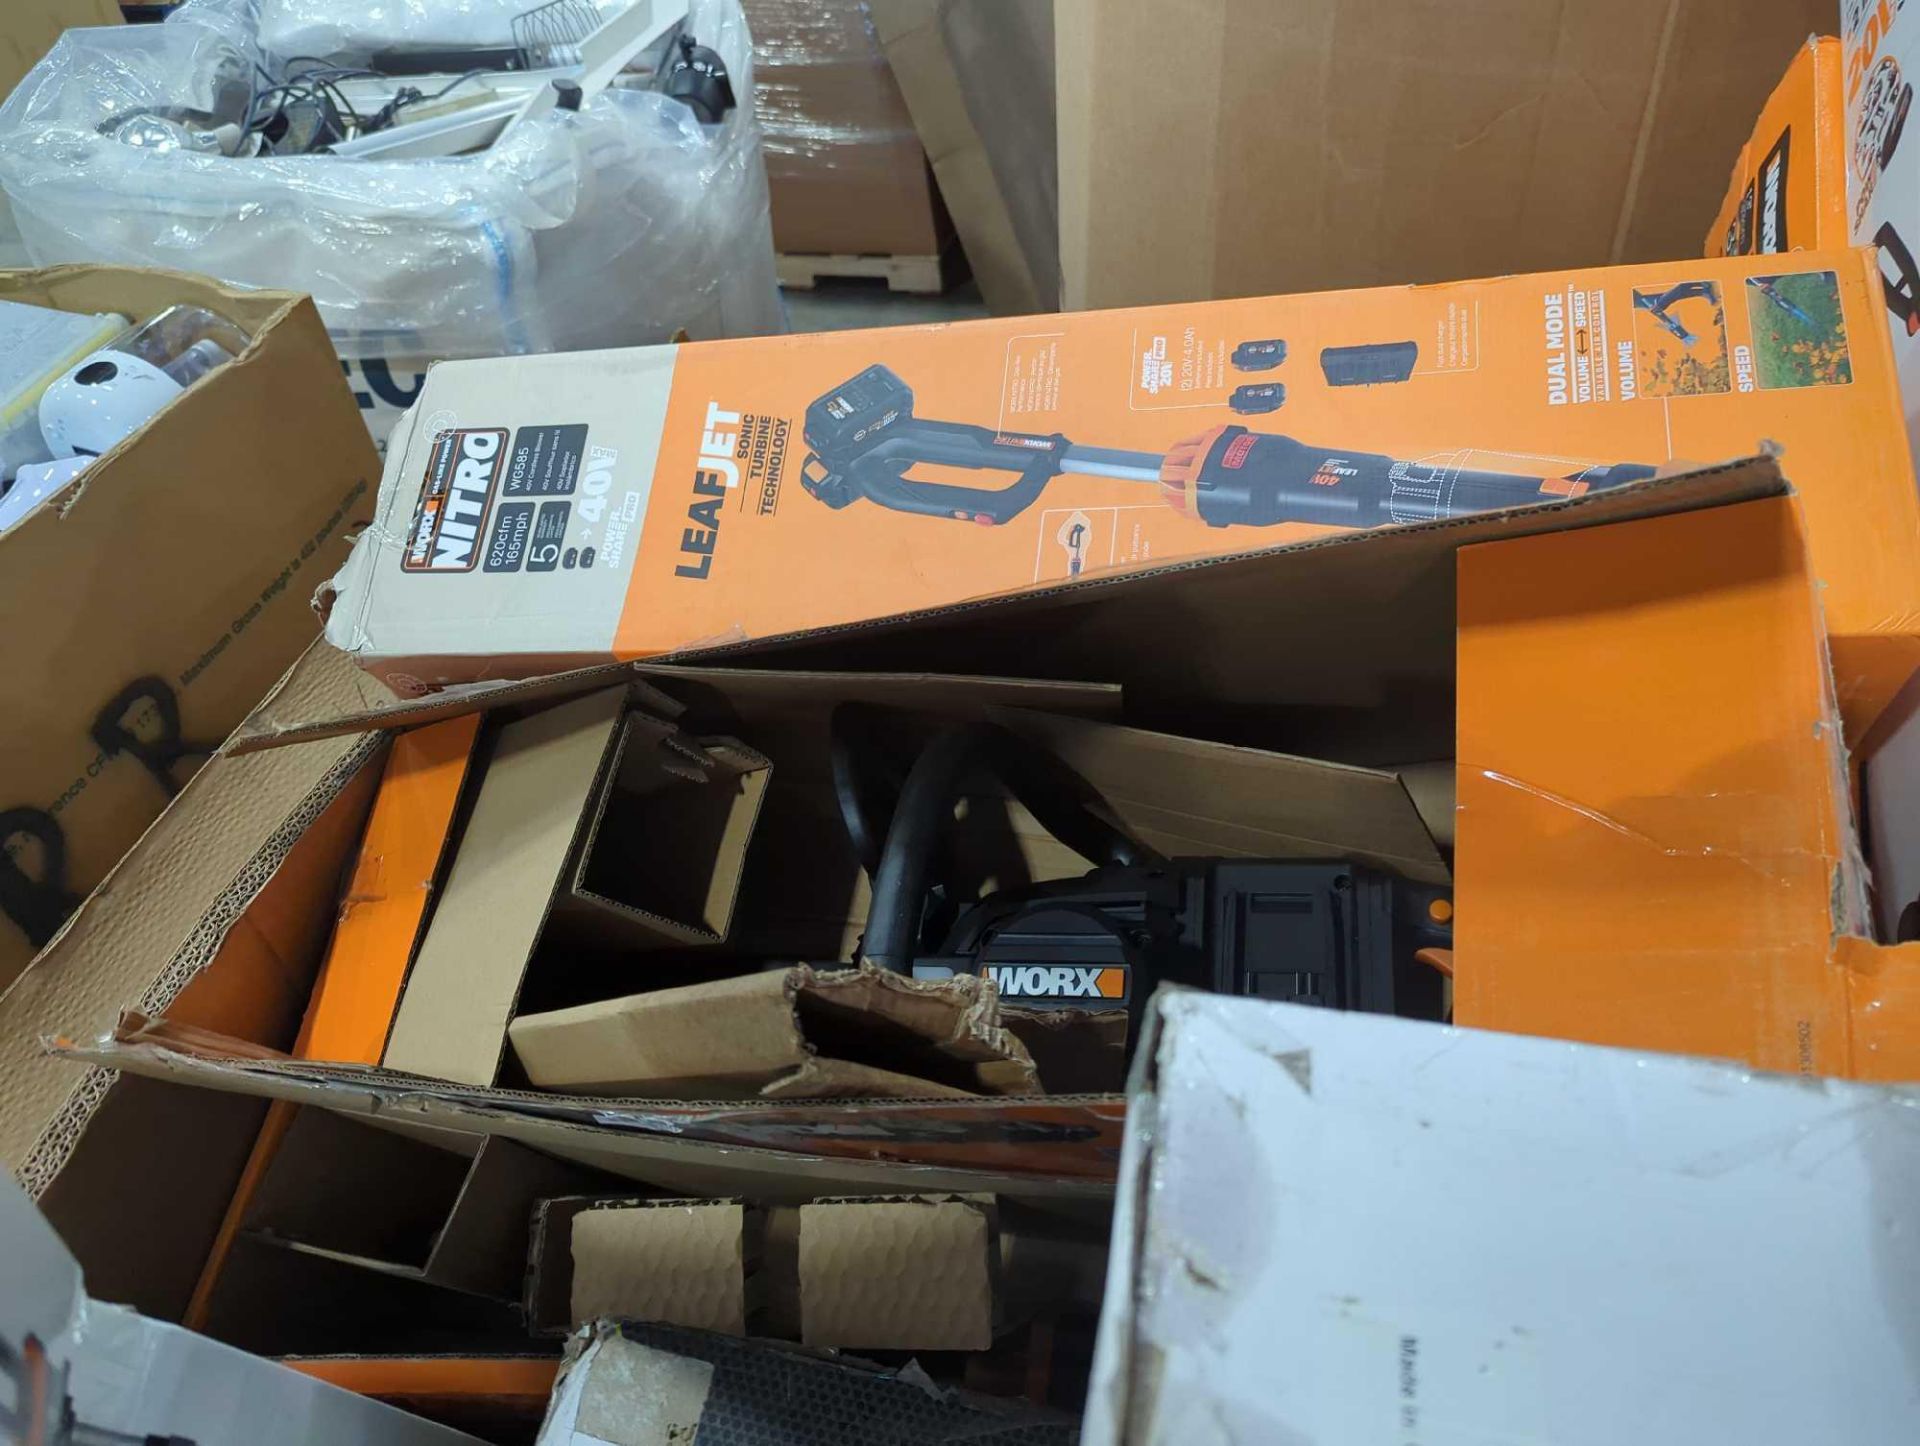 GL- Worx trimmers, cutters, blowers and more (used, customer returns) - Image 6 of 12